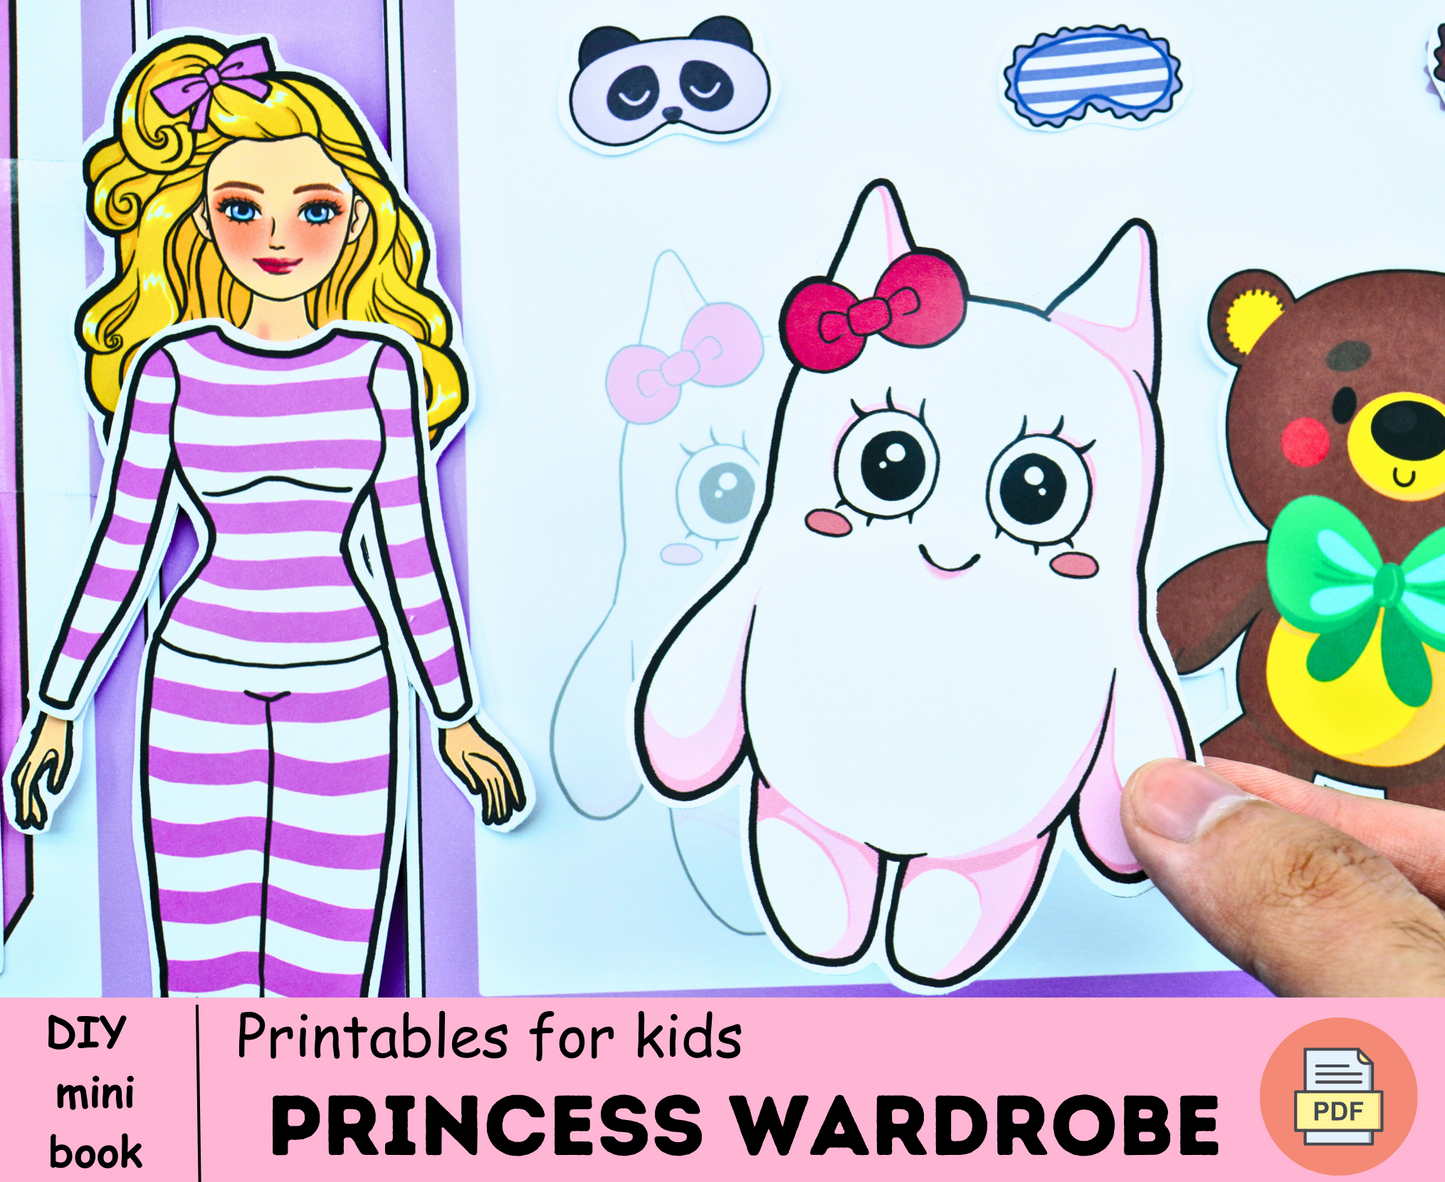 Pijama wardrobe for Printable Paper Doll Dress Up Kit 🌈DIY Busy Book | Easy Paper Craft | Girls Crafts | Holiday Home Activity for Kids 🌈 Woa Doll Crafts